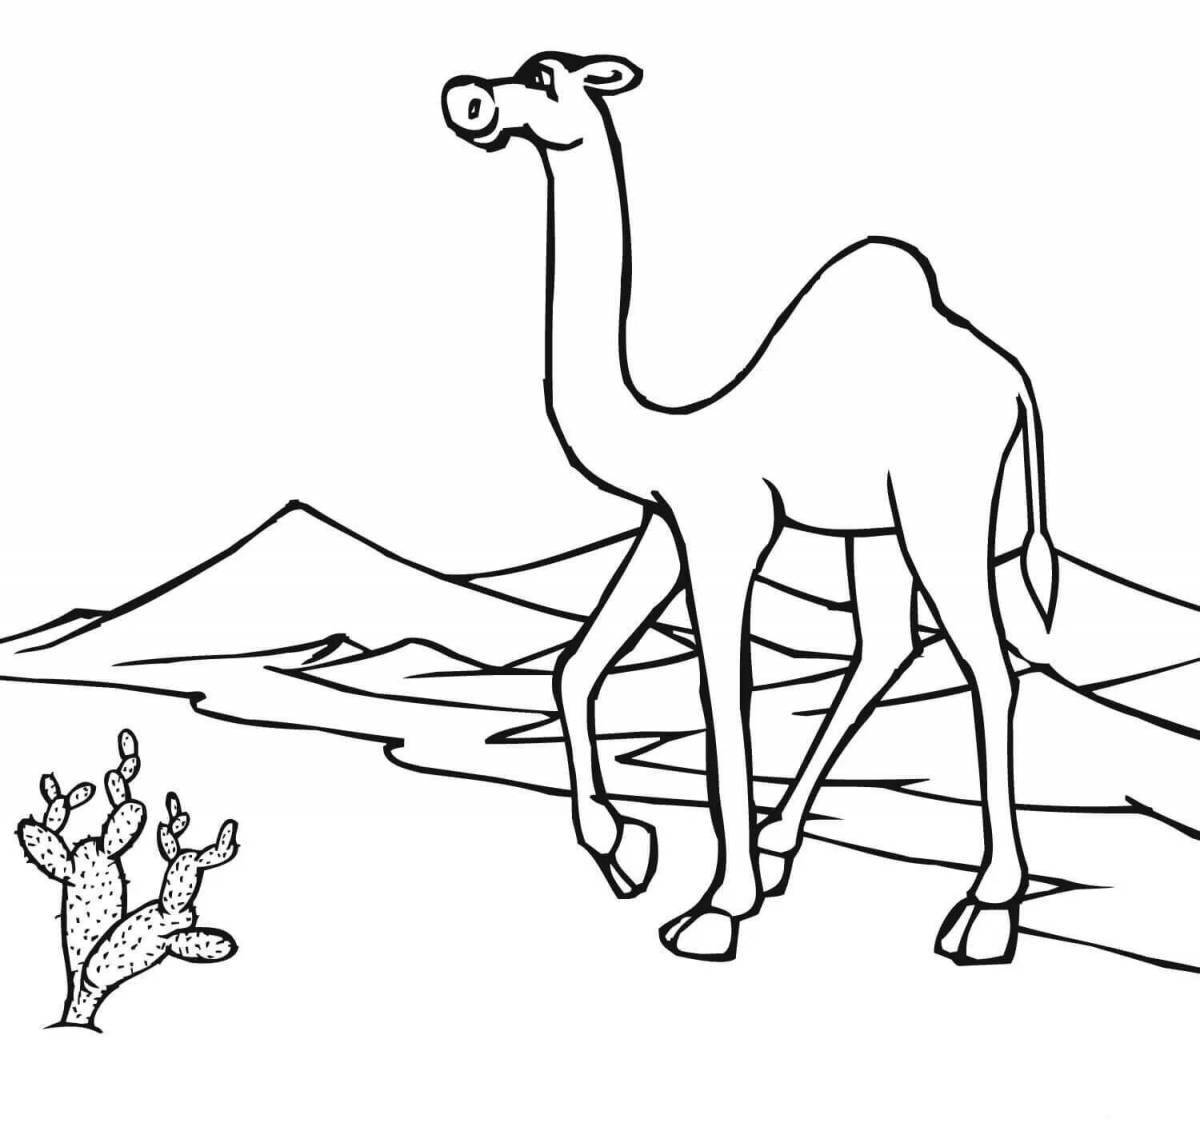 Radiant coloring page desert animals